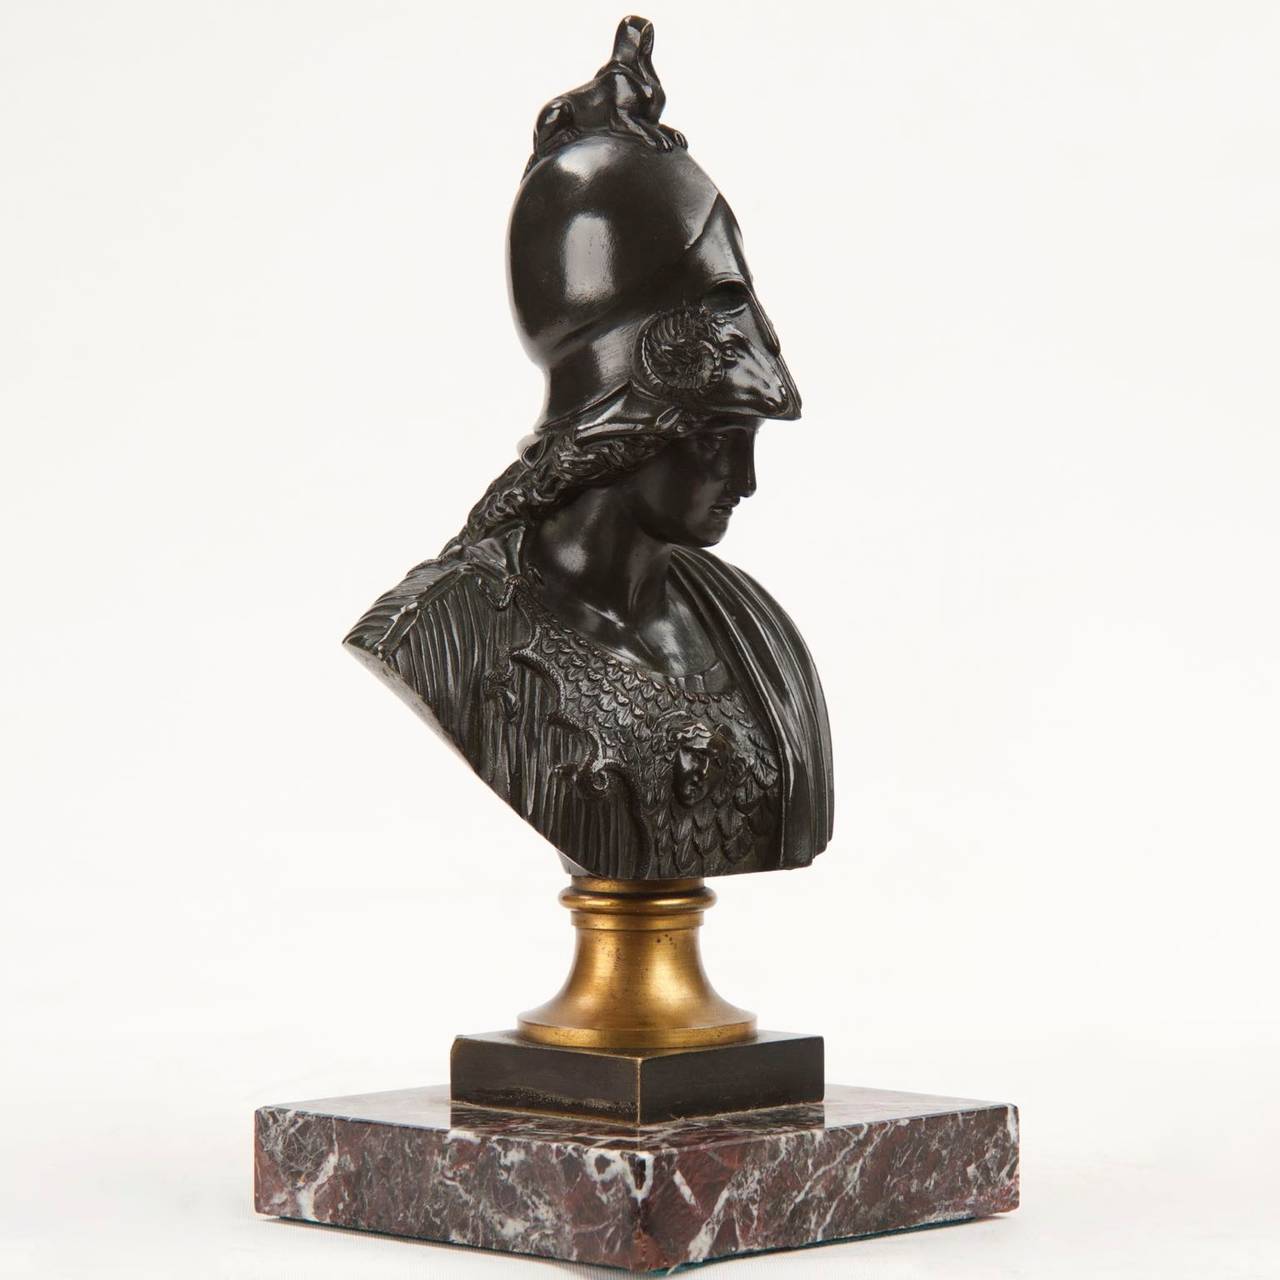 This exquisitely cast bronze sculpture is inordinately detailed for it's small stature and limited surface - almost jewelry like attention to detail is invested in the cast, the tiny details chased and filed into a nearly perfect result.  This was